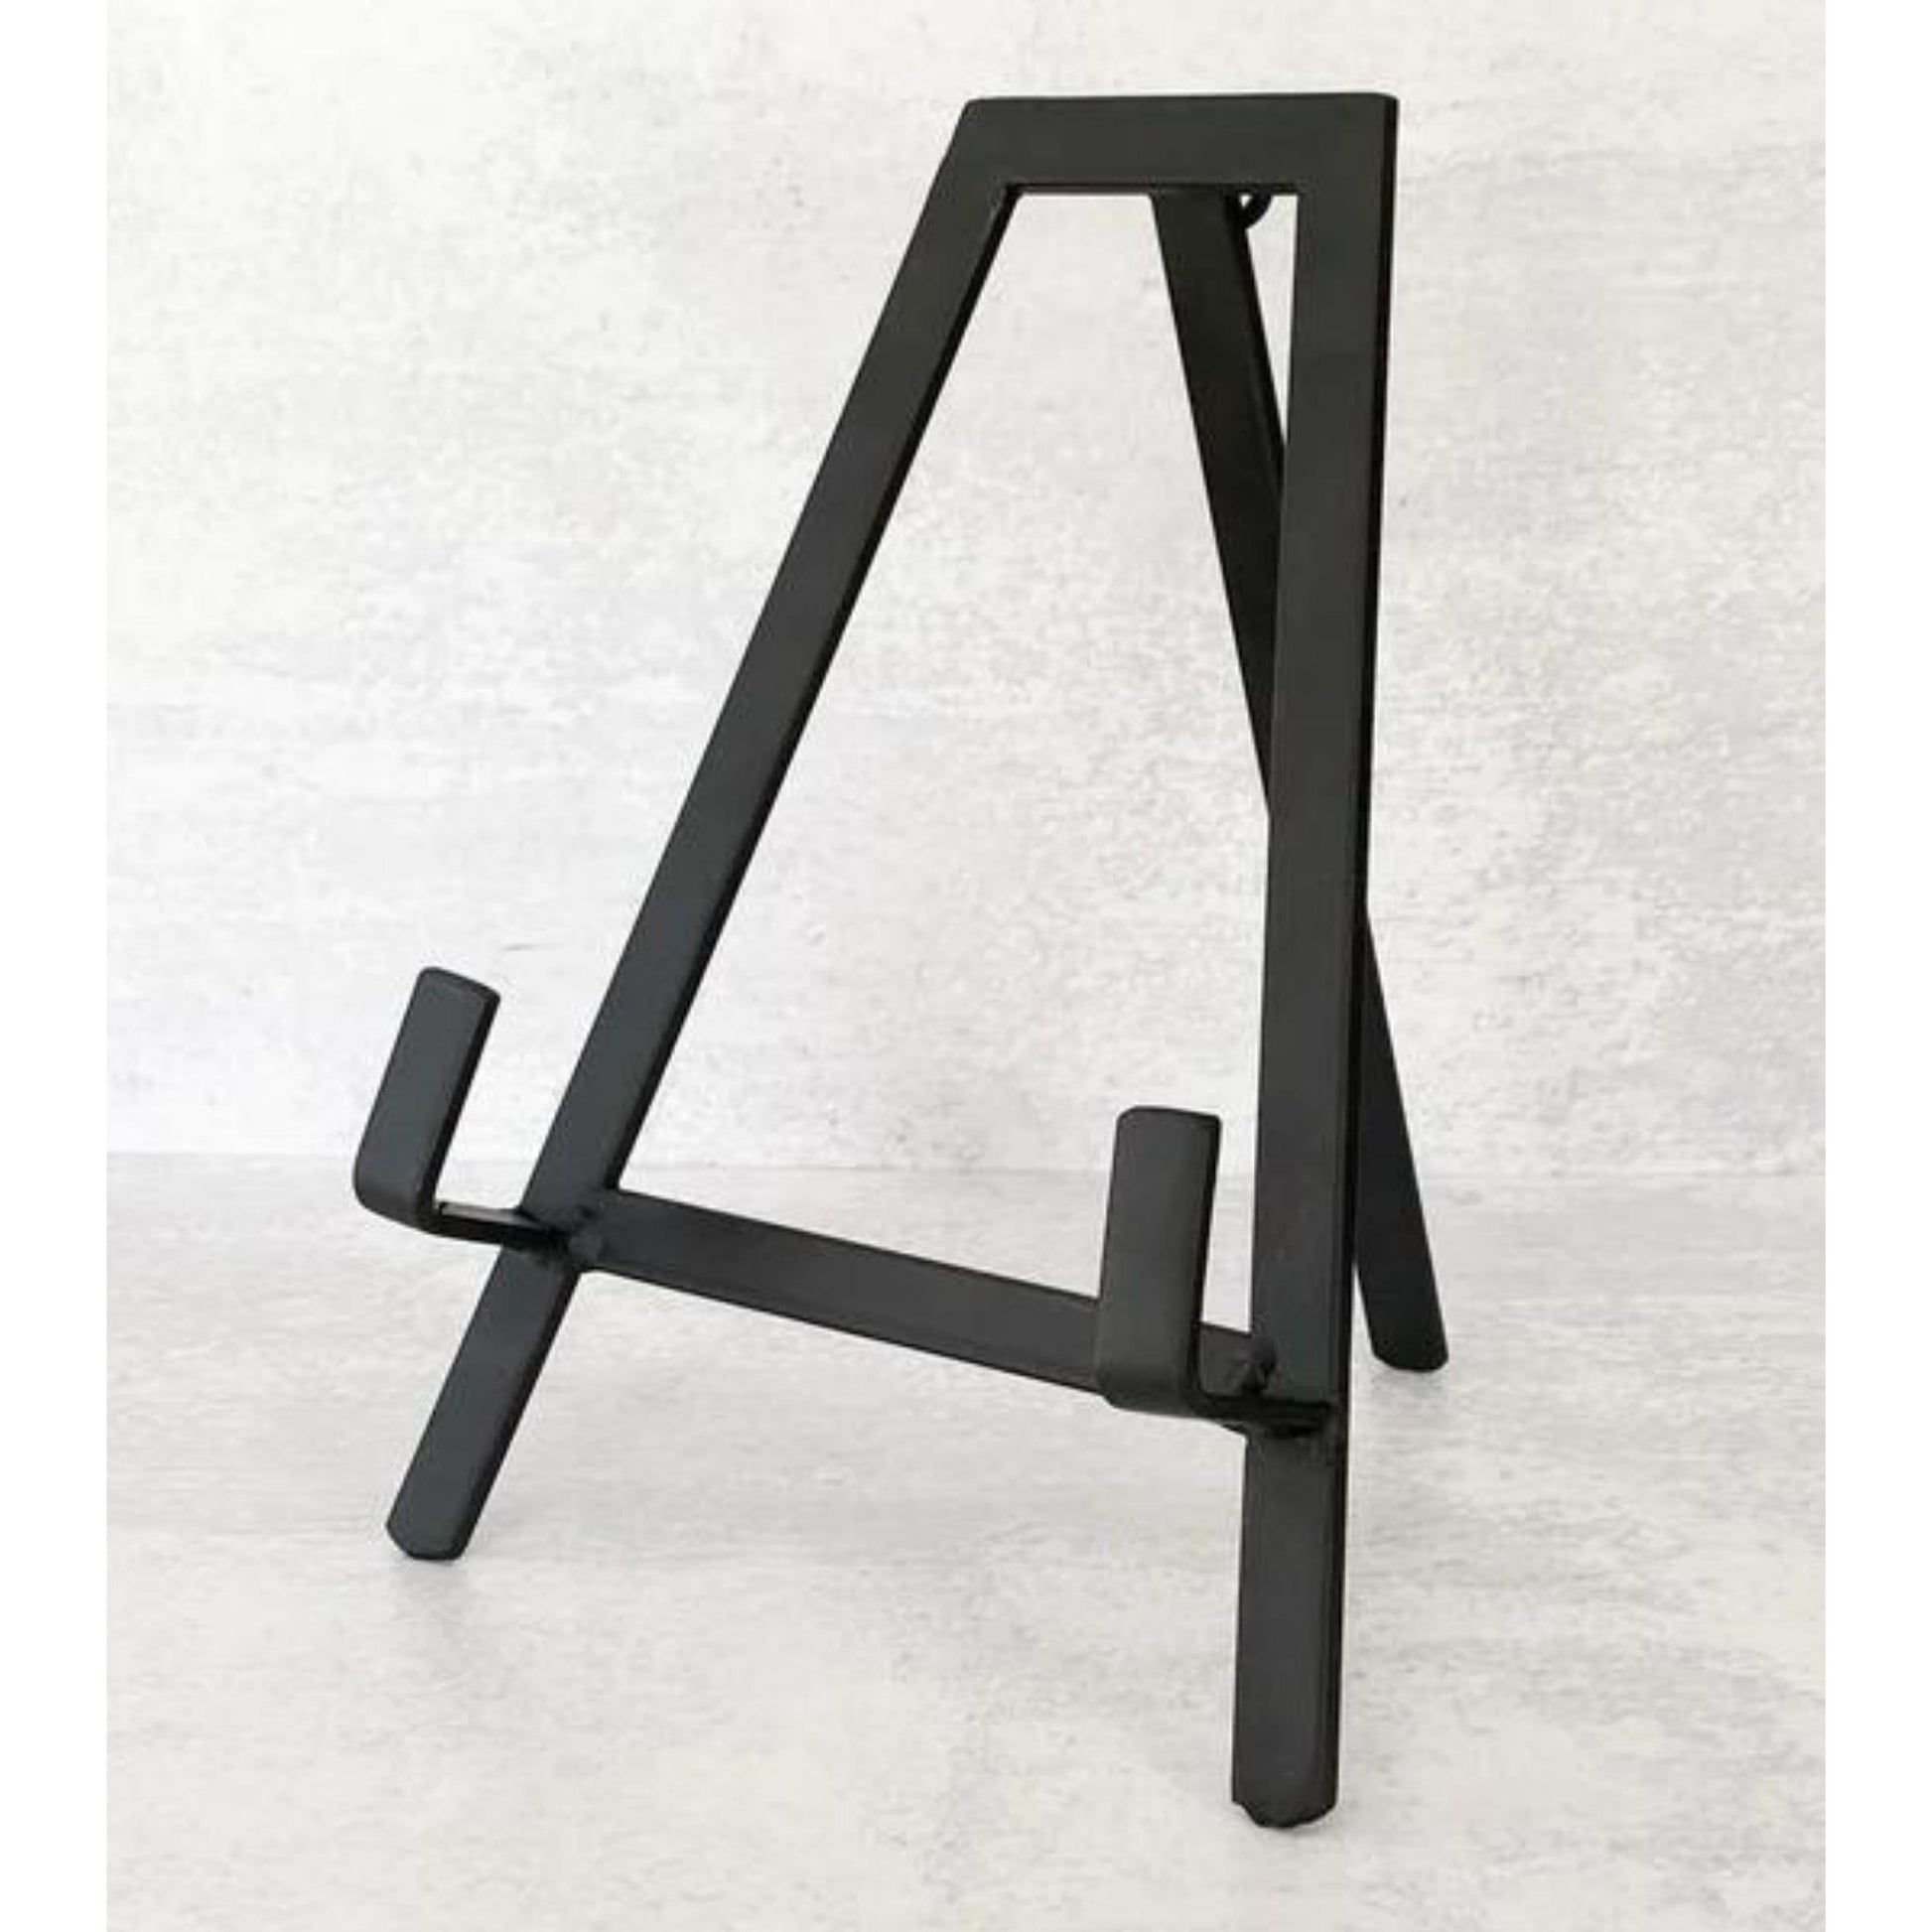 12 Modern Black Display Easel for Pictures, Art, Books, Plates